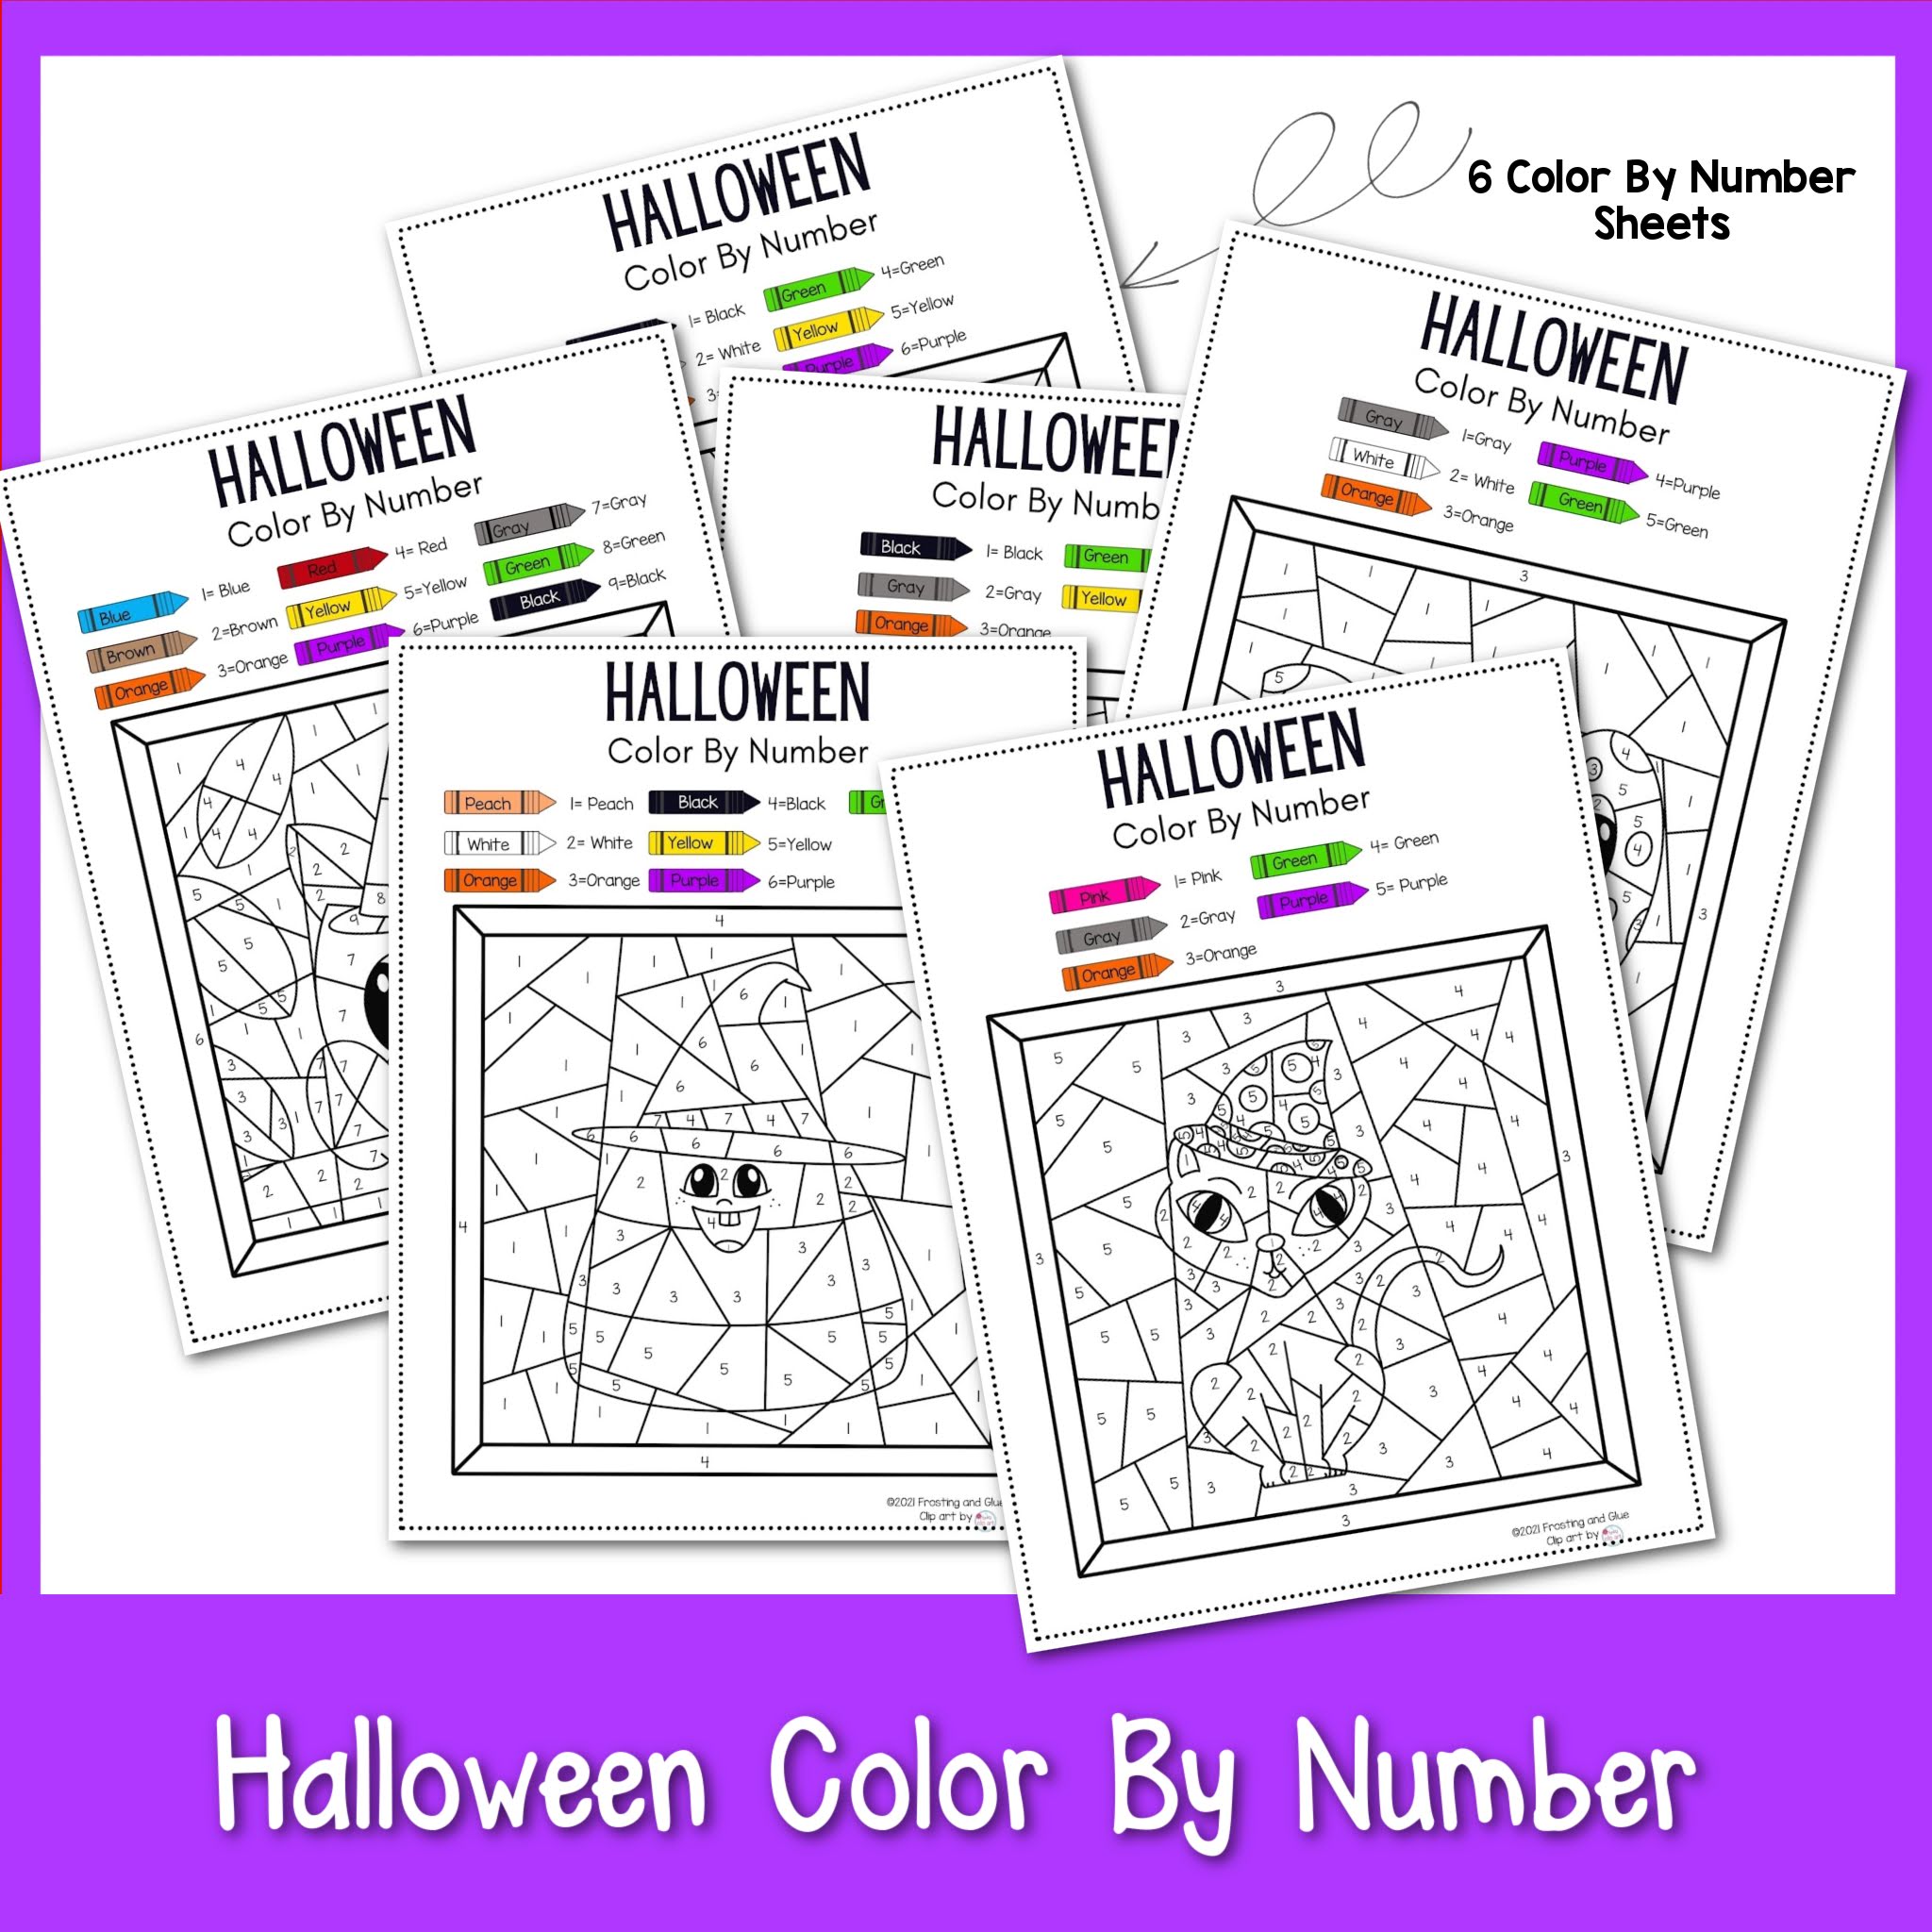 Halloween Color By Number Pages